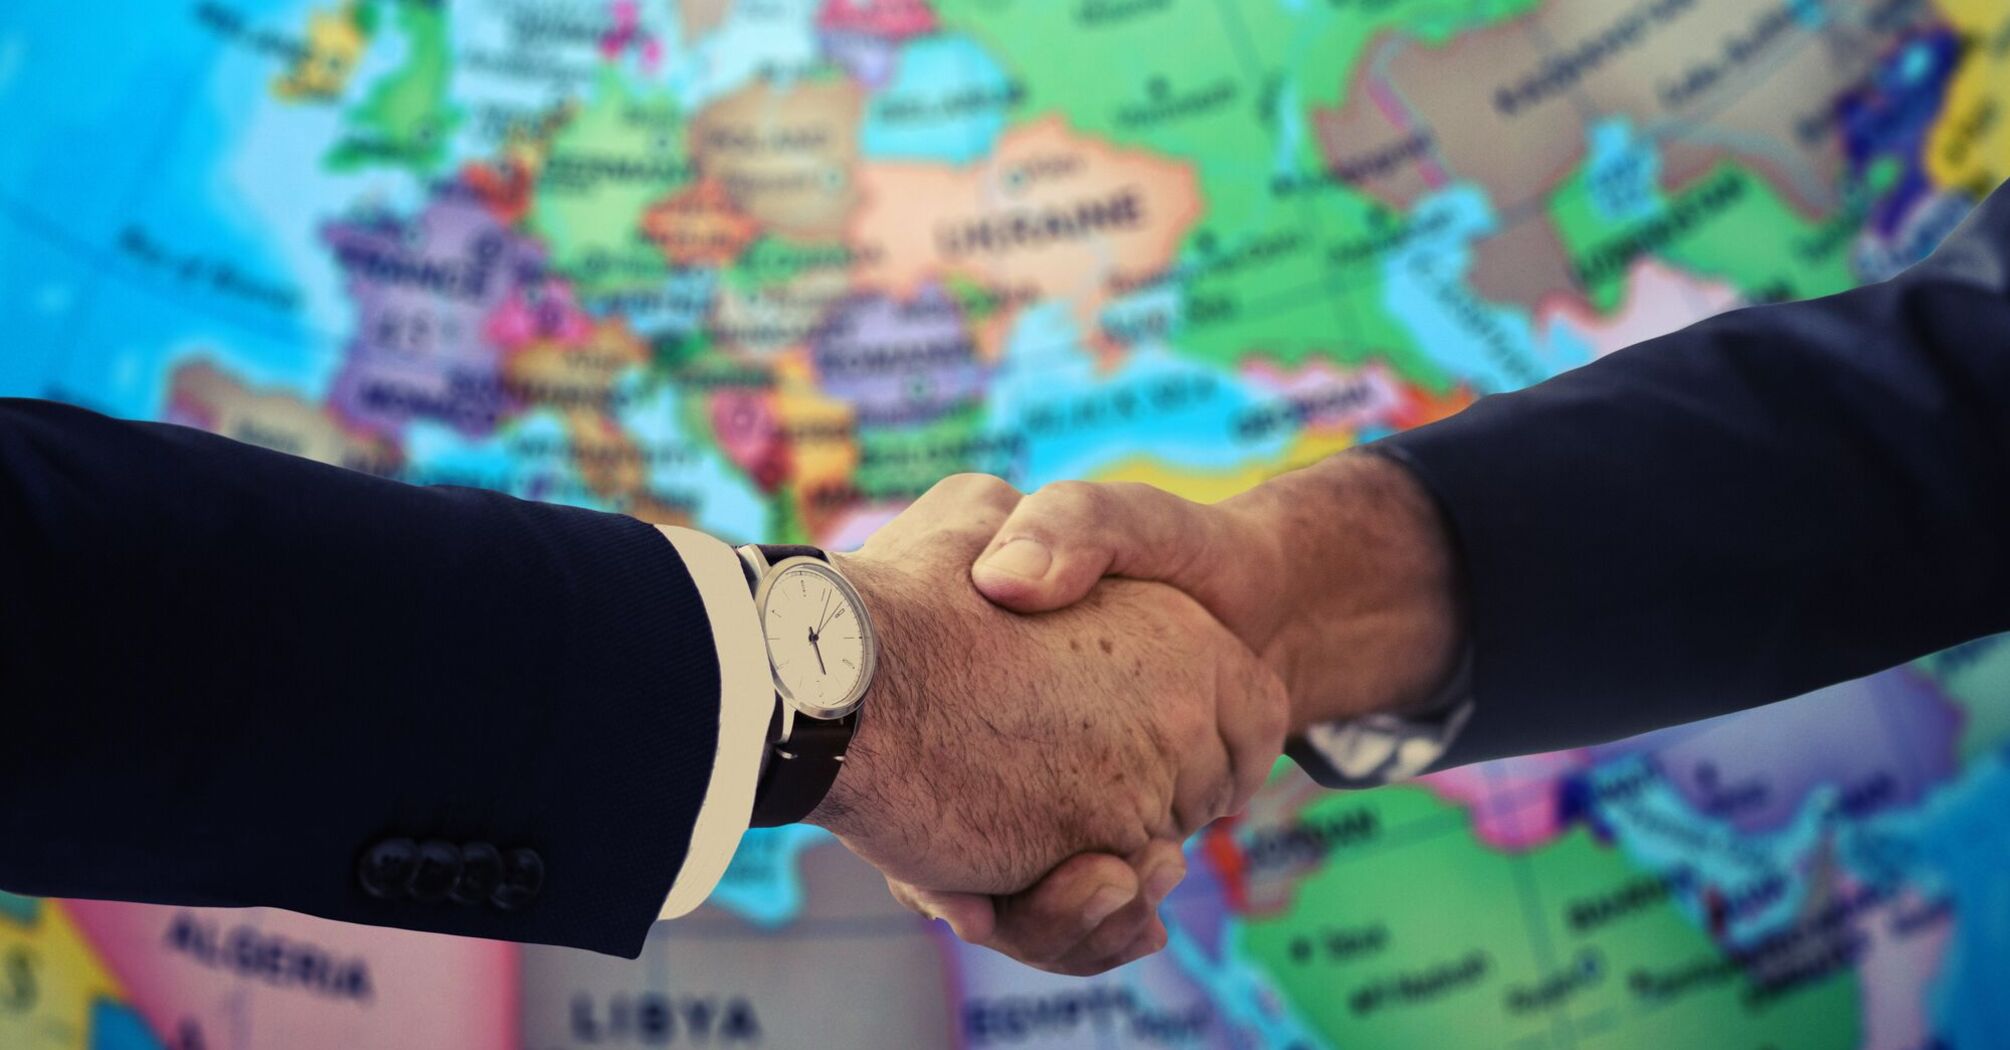 Handshakes on the background of a world map